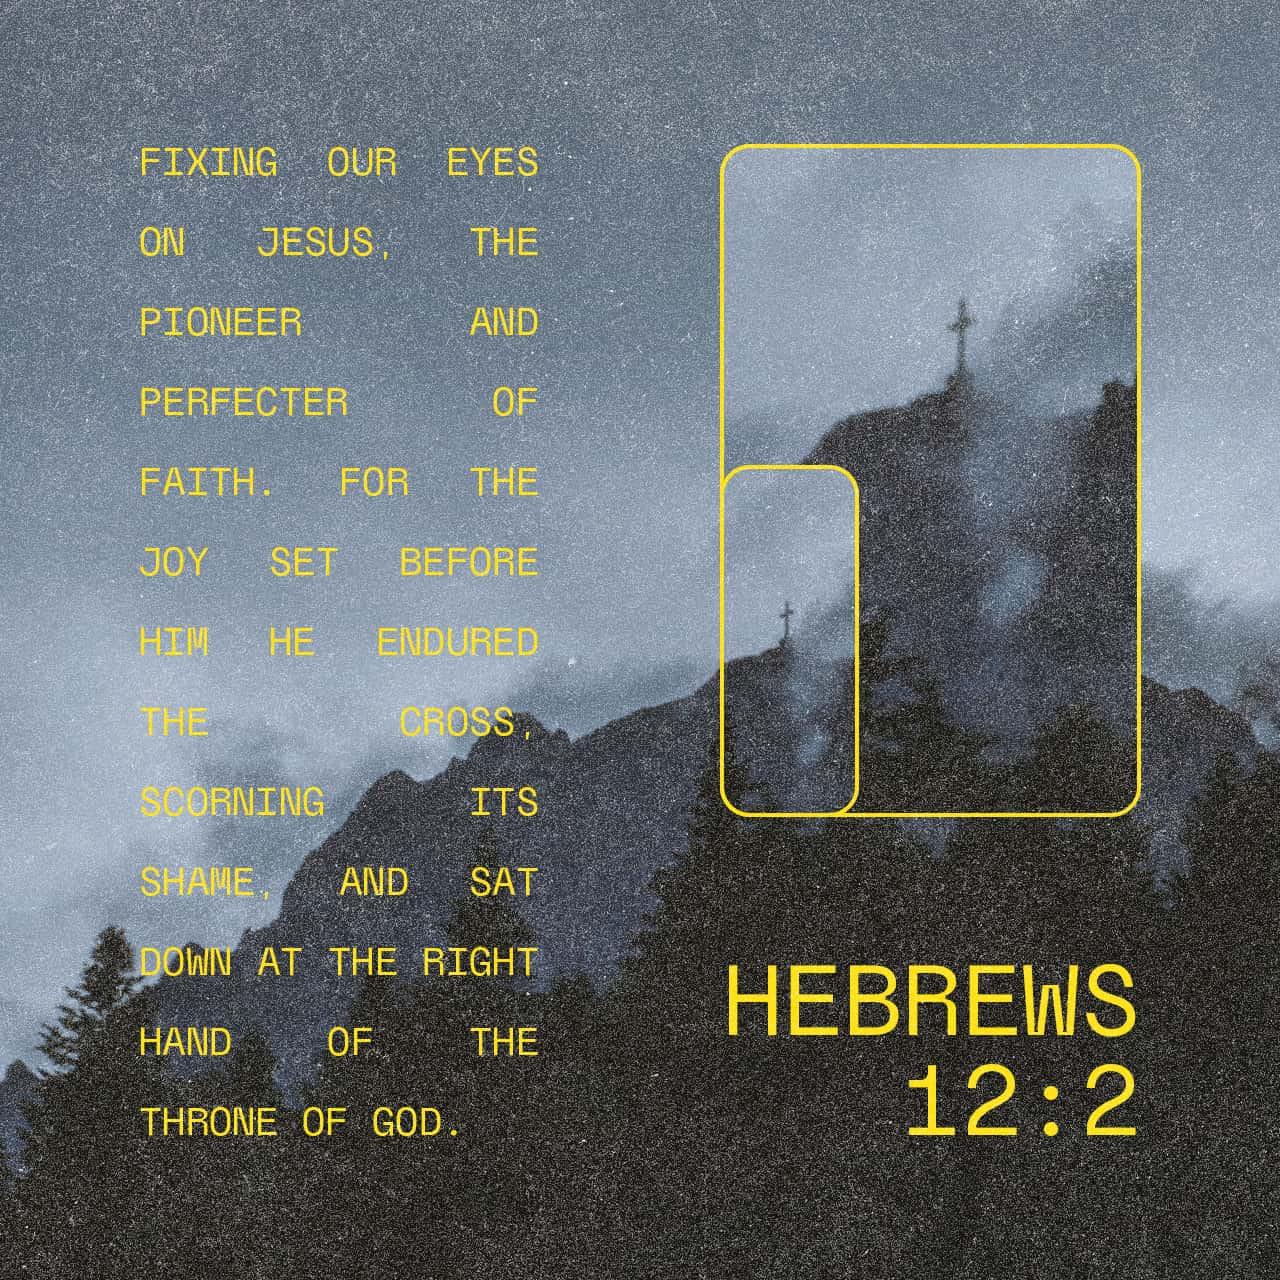 Bible Verse of the Day - day 87 - image 56520 (Hebrews 12:2)